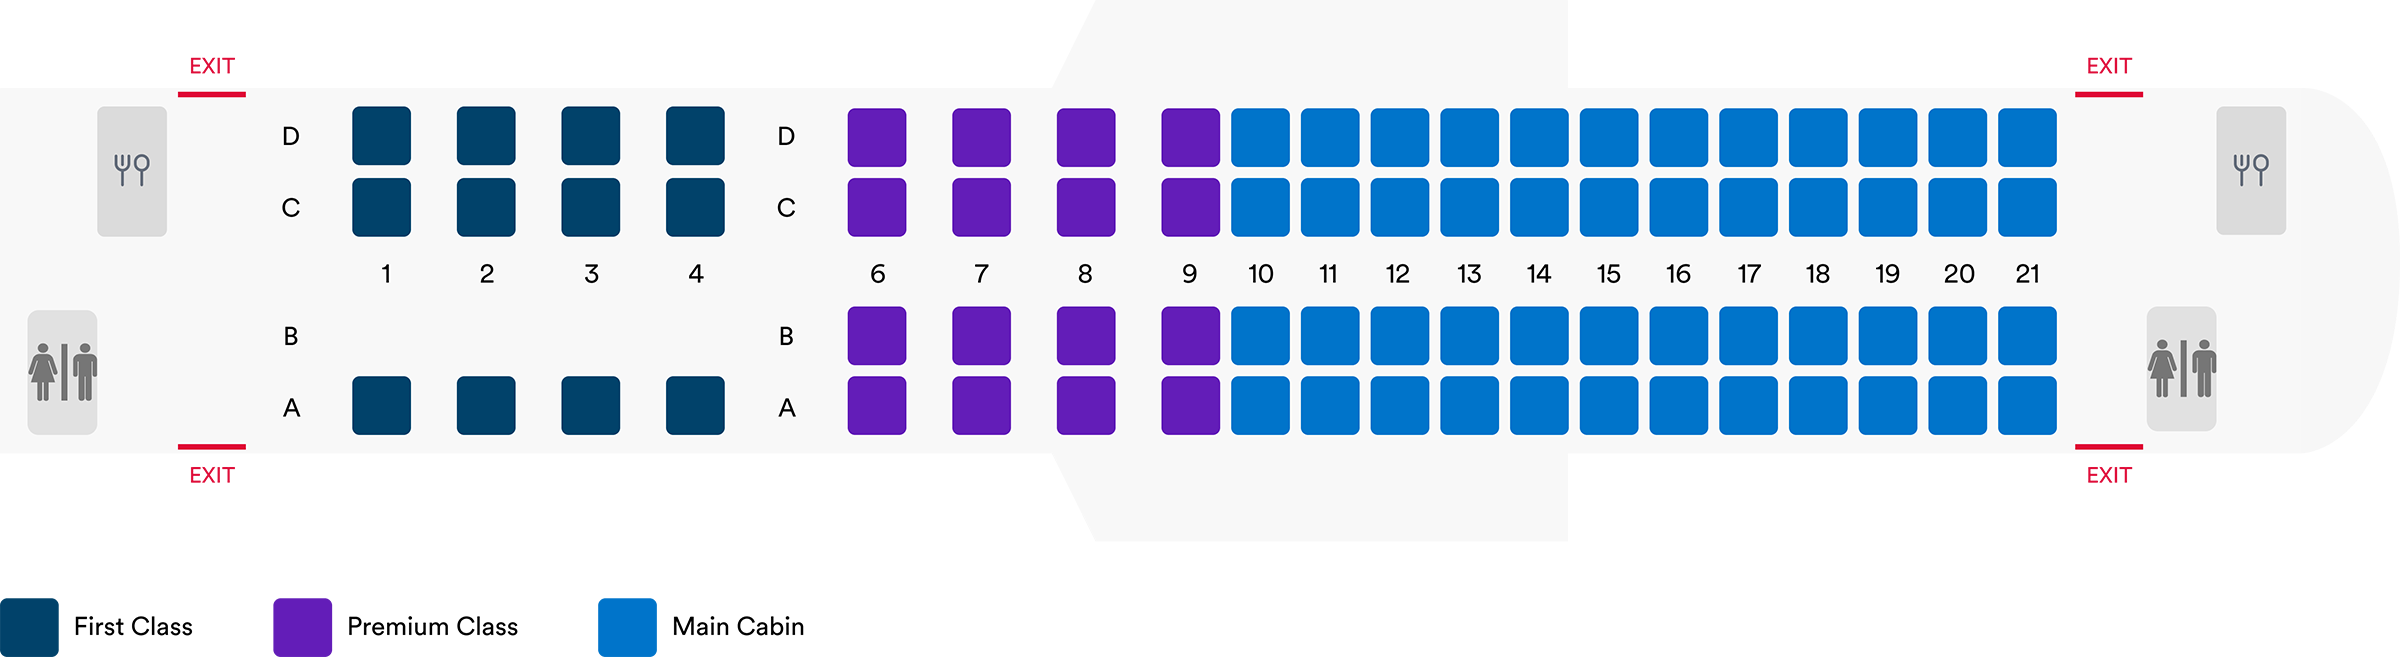 Seatmap of the Embraer 175